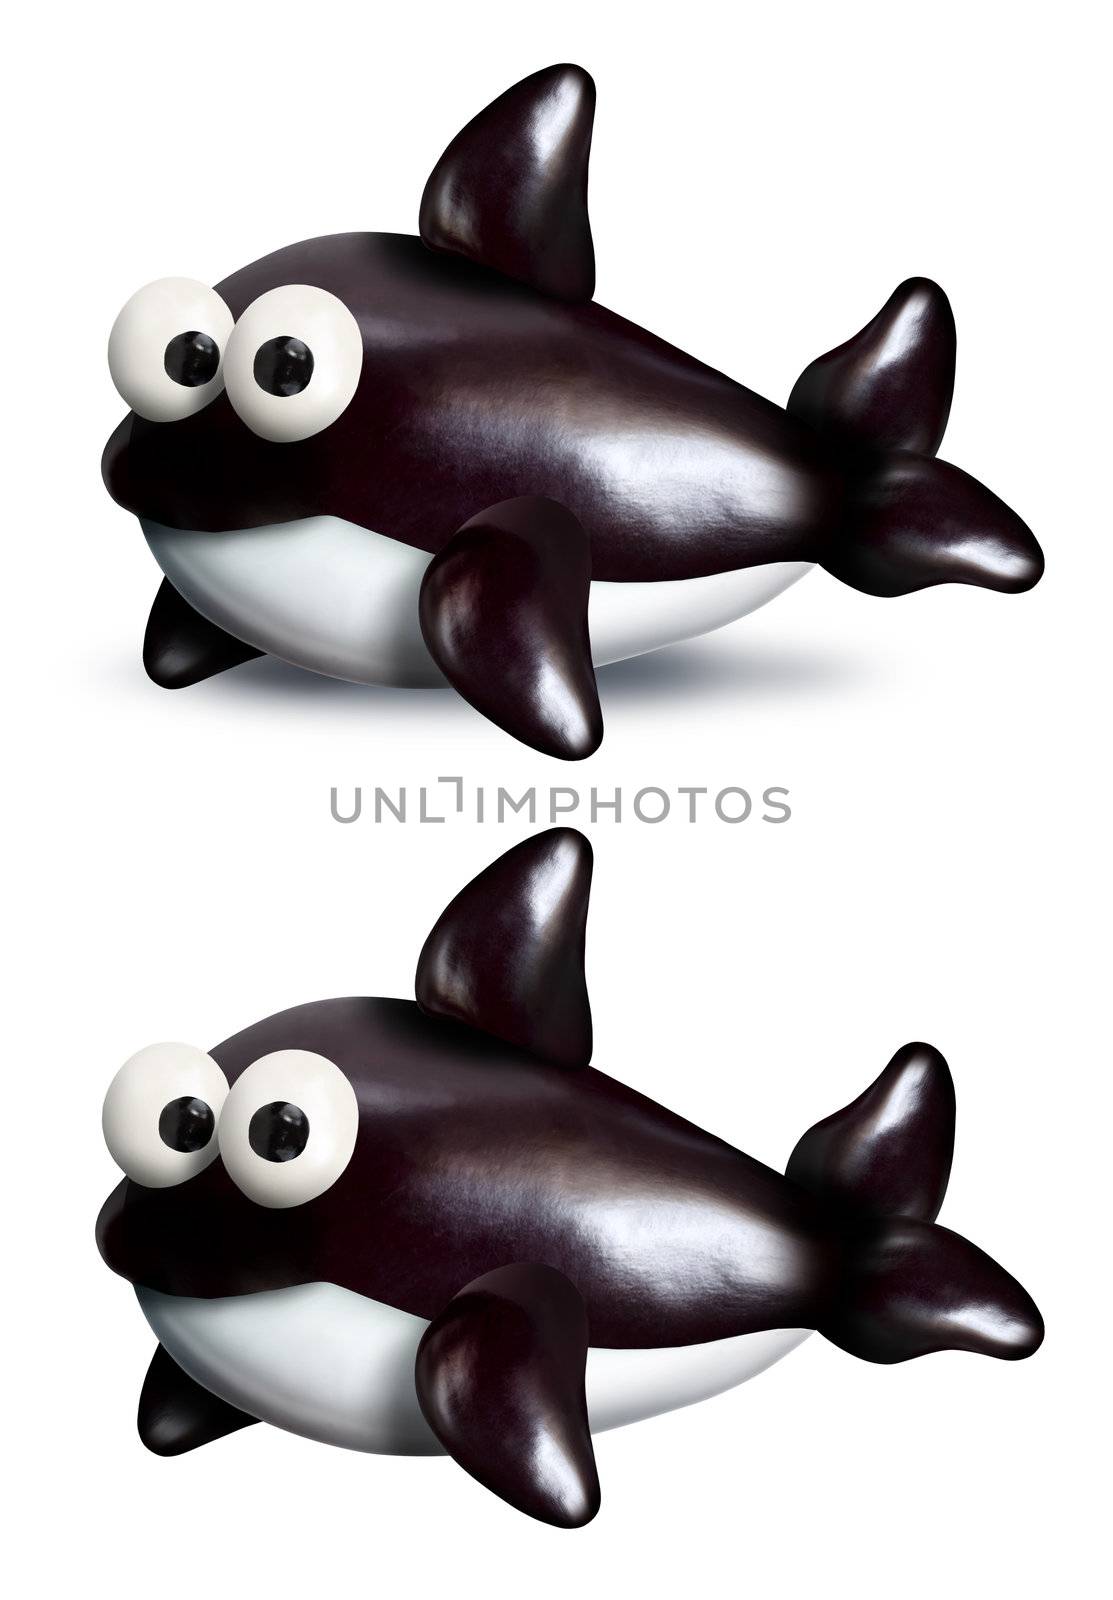 A cartoon killer whale made with vegetables and fruit.